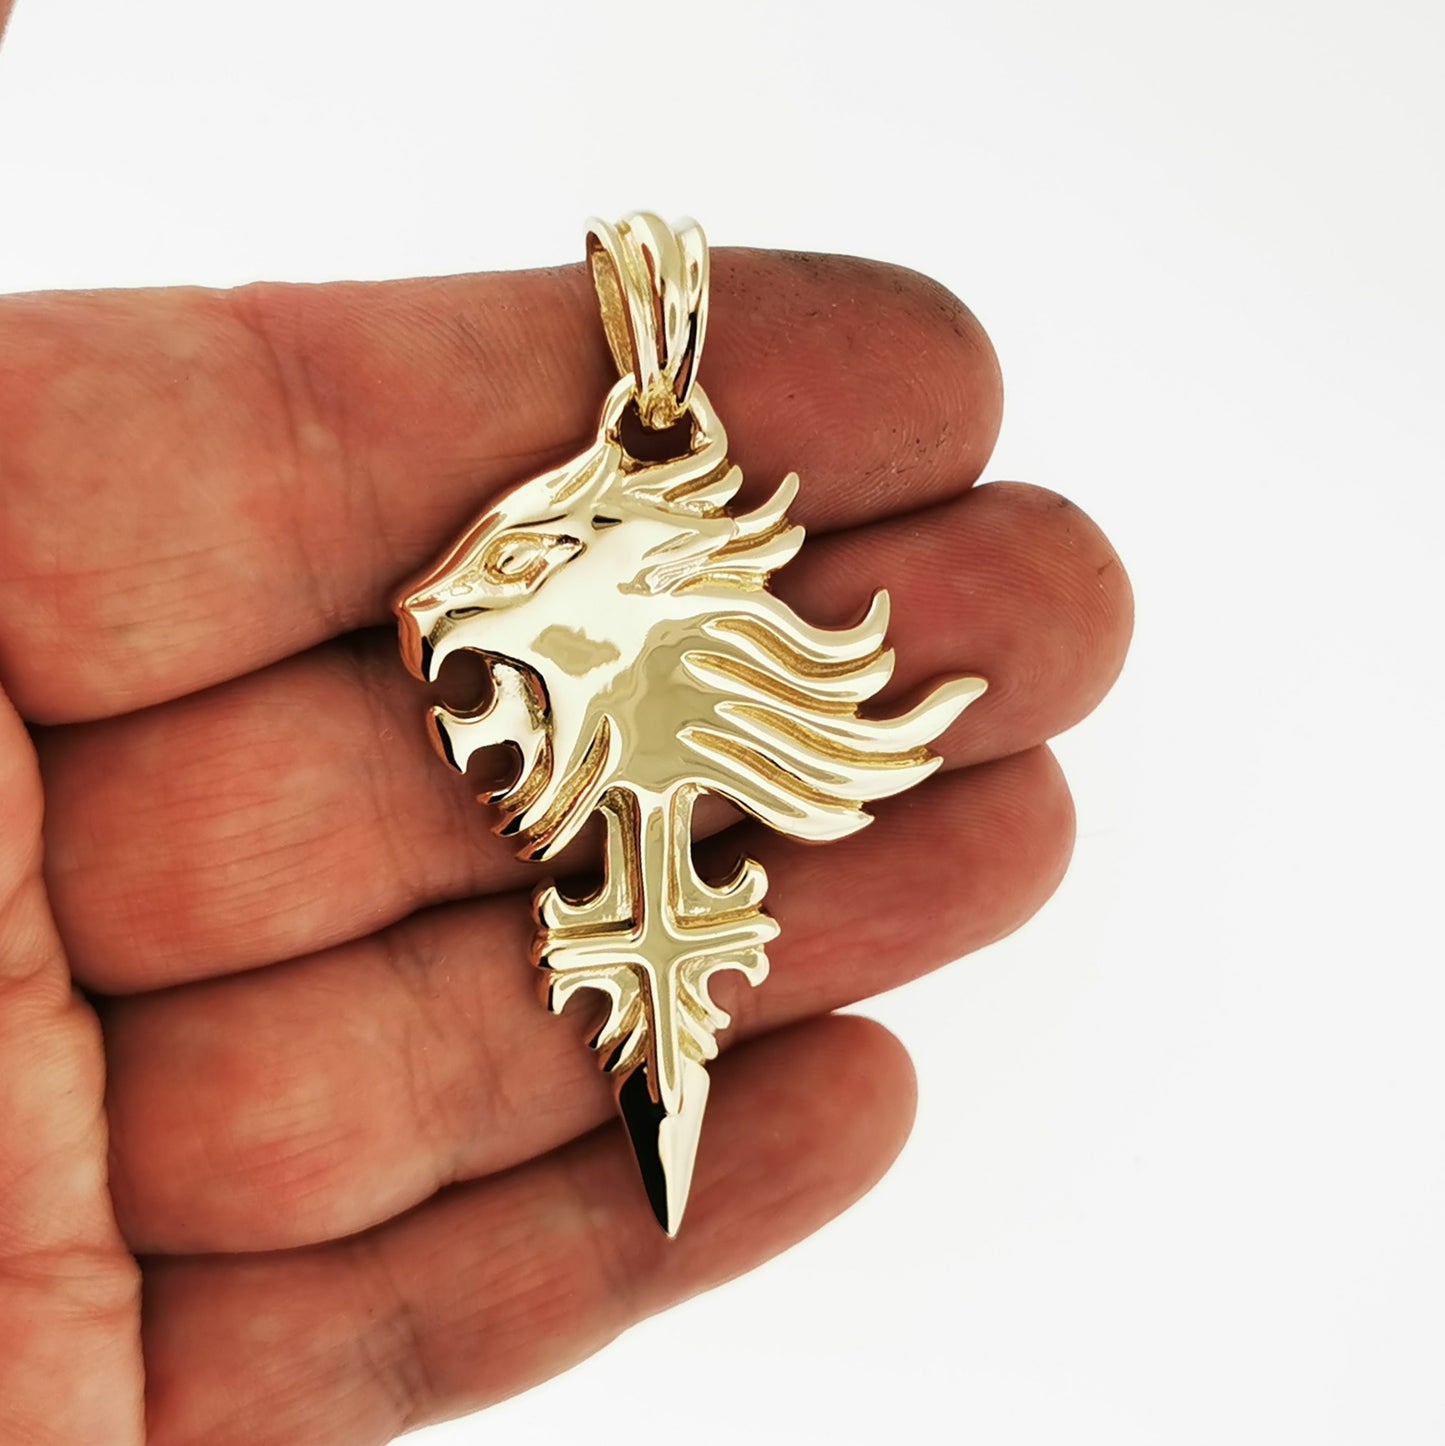 Medium Final Fantasy 8 Squall Griever Pendant in Yellow Gold, FF8 Sleeping Lion Pendant, Final Fantasy VIII Pendant, Squall Cosplay, FF8 Pendant, gold gamer pendant, gold griever pendant, gold final fantasy jewelry, gold sleeping lion pendant